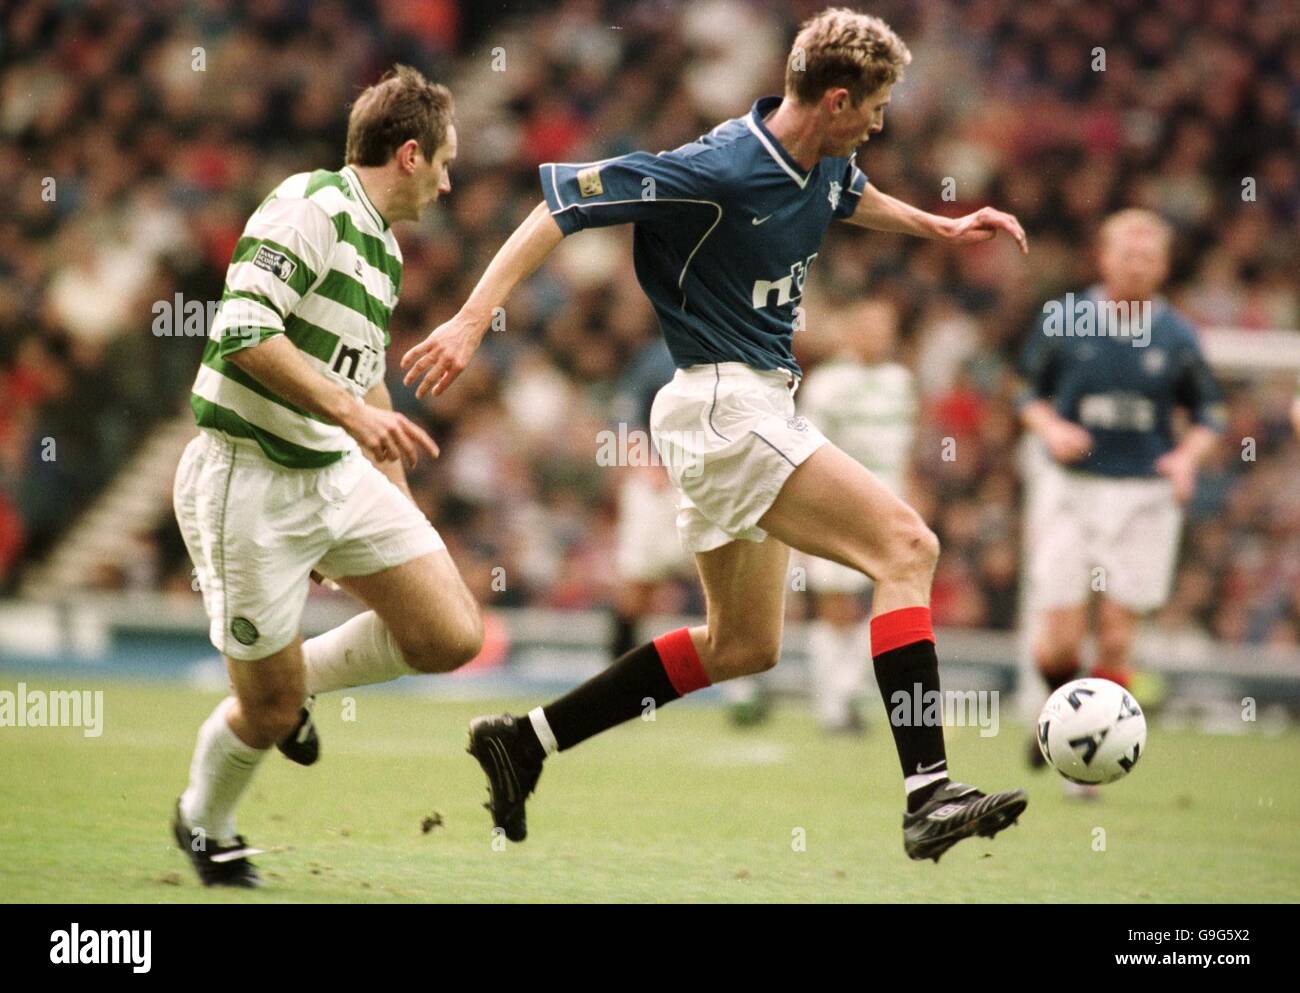 Soccer - Bank Of Scotland Premier League - Rangers v Celtic. Rangers' Tore Andre Flo (r) gets away from Celtic's Tommy Boyd (l) Stock Photo